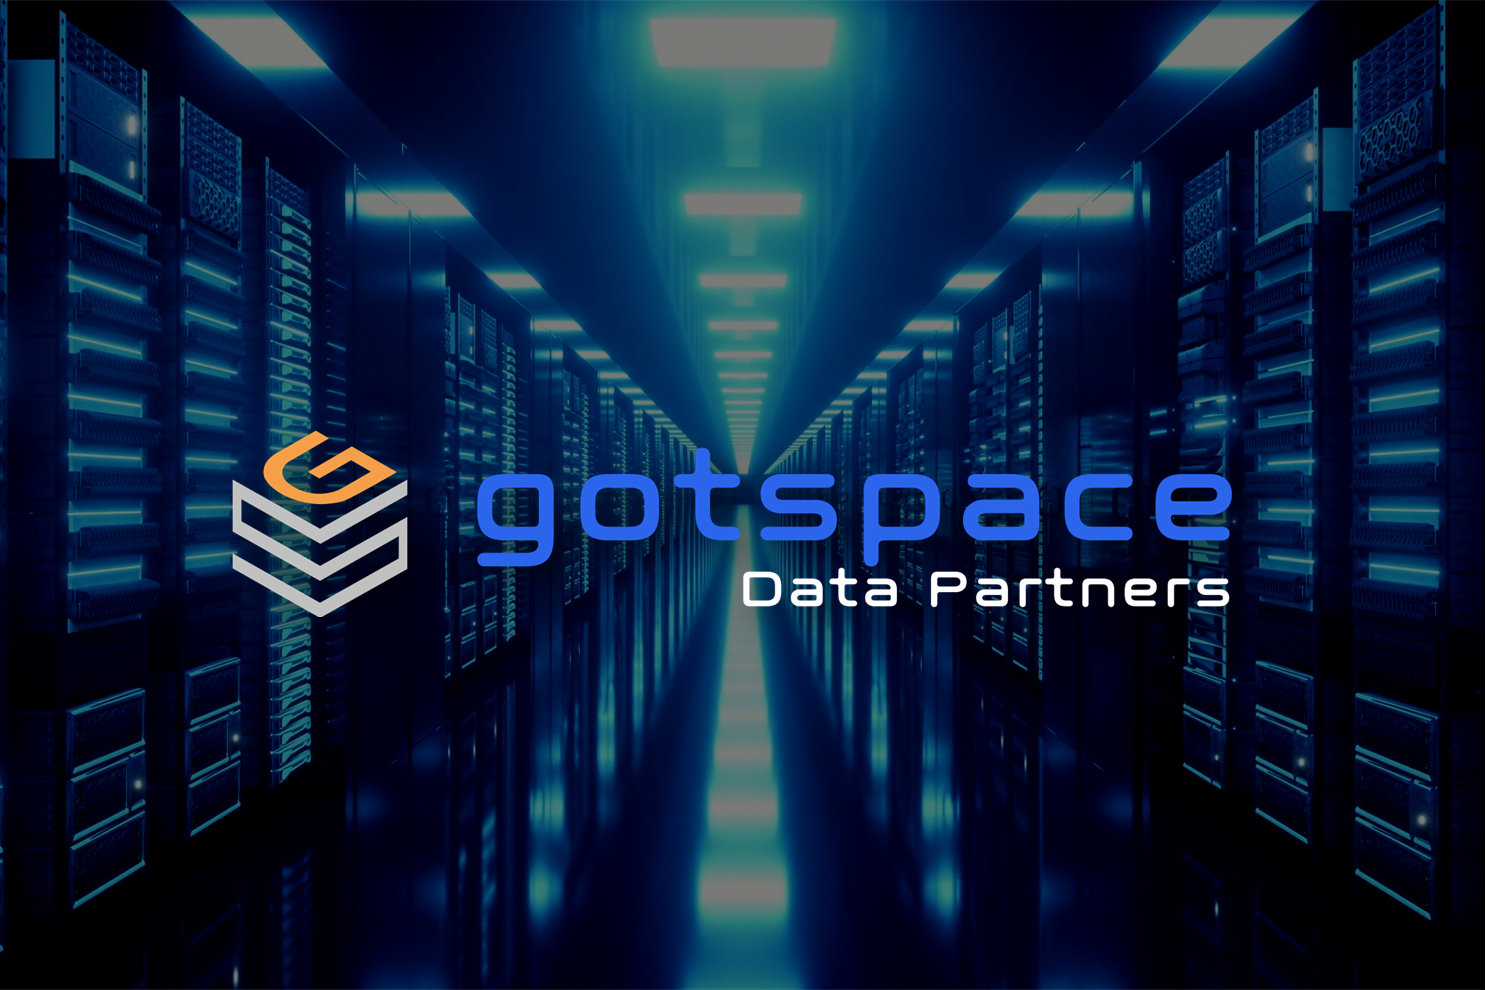 Mike Grella Joins Gotspace Data Partners As Chief Operating Officer